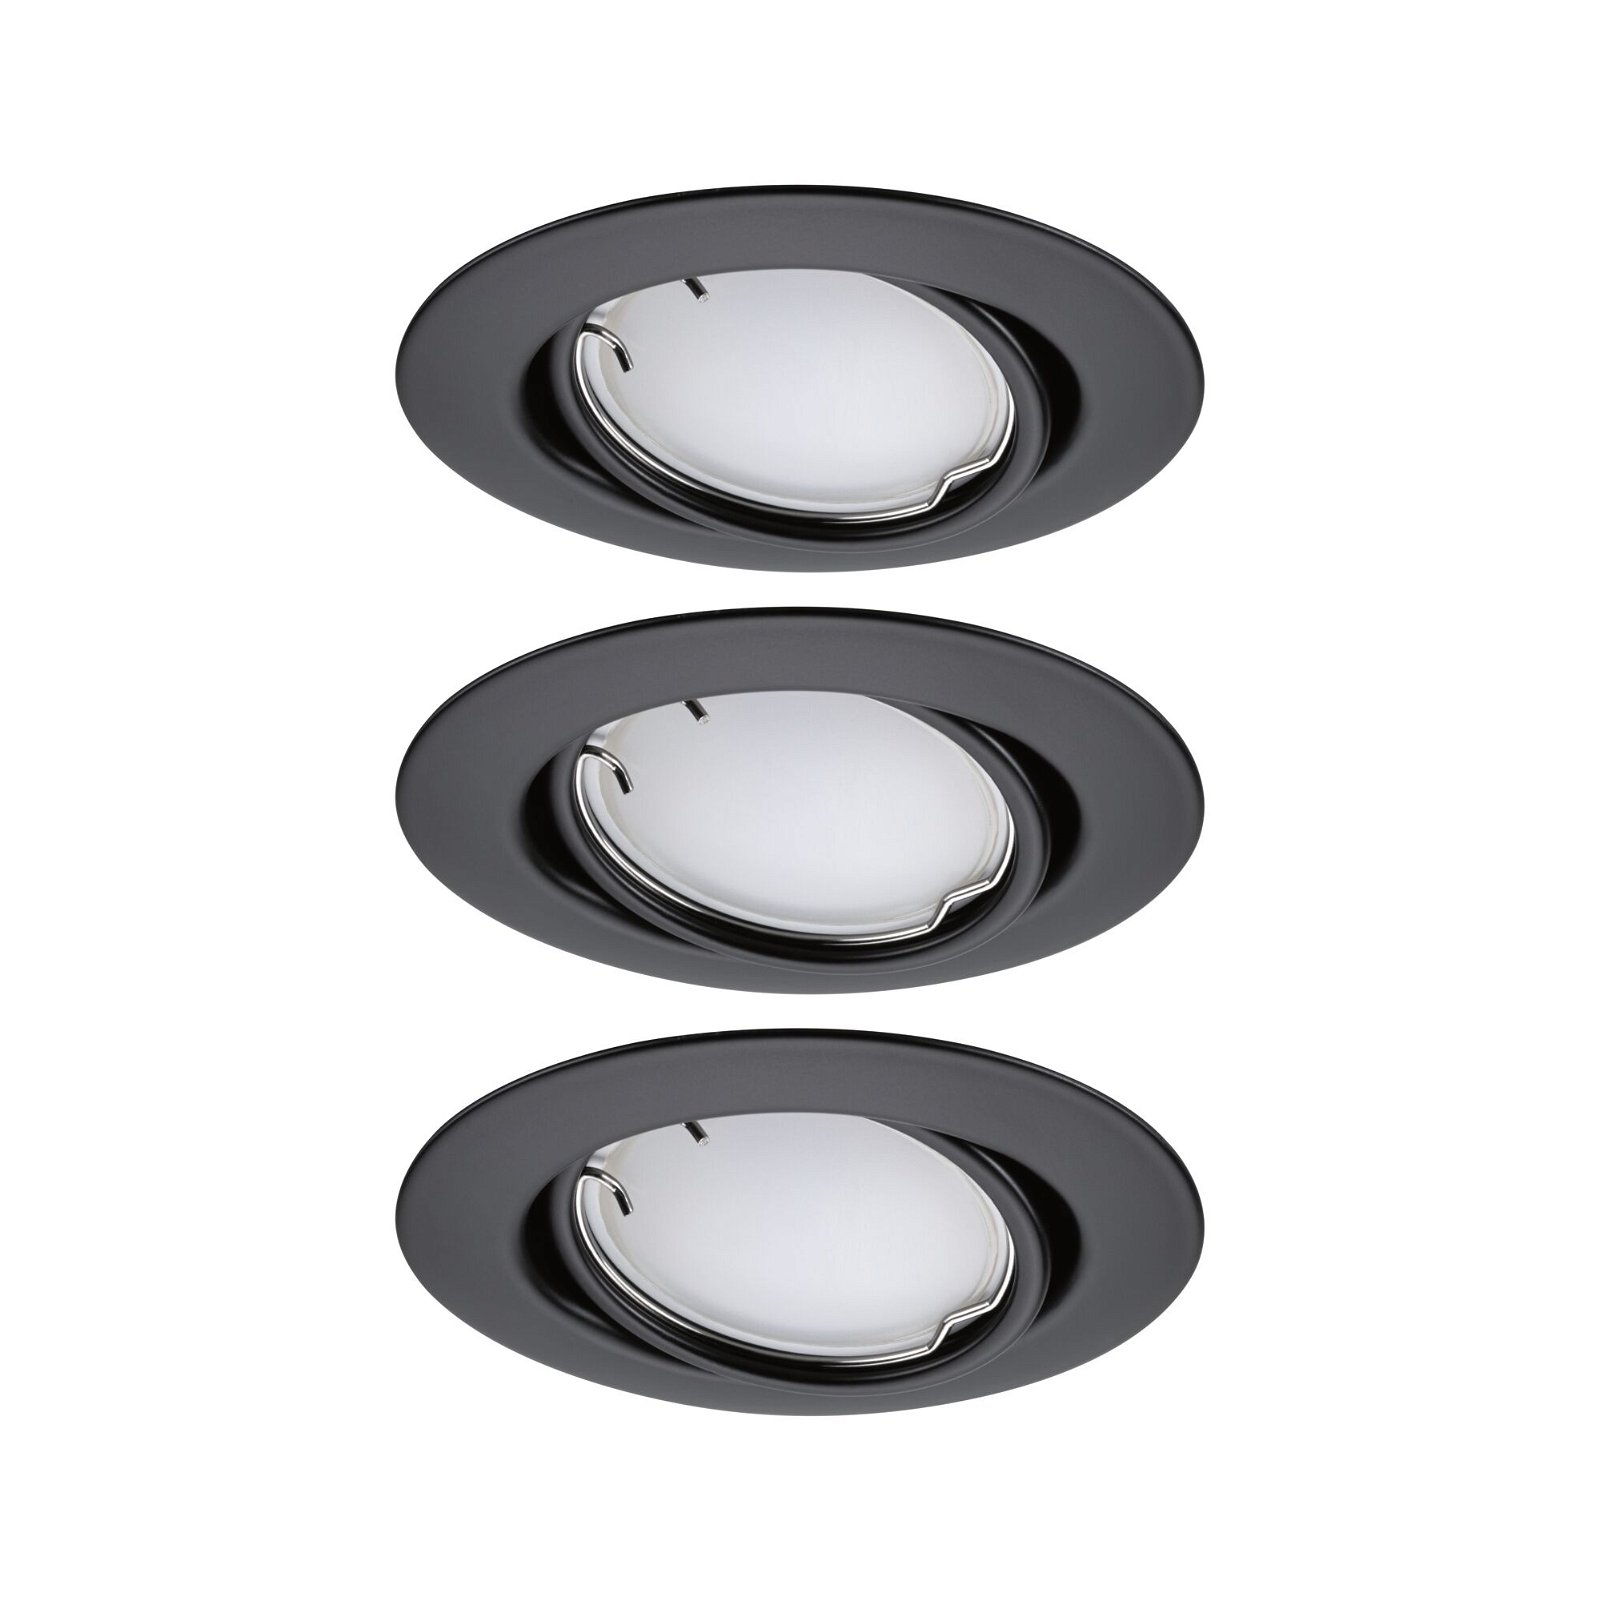 LED Recessed luminaire Smart Home Zigbee 3.0 Base Coin Basic Set Swivelling round 90mm 20° 3x4,9W 3x420lm 230V dimmable RGBW+ Black matt